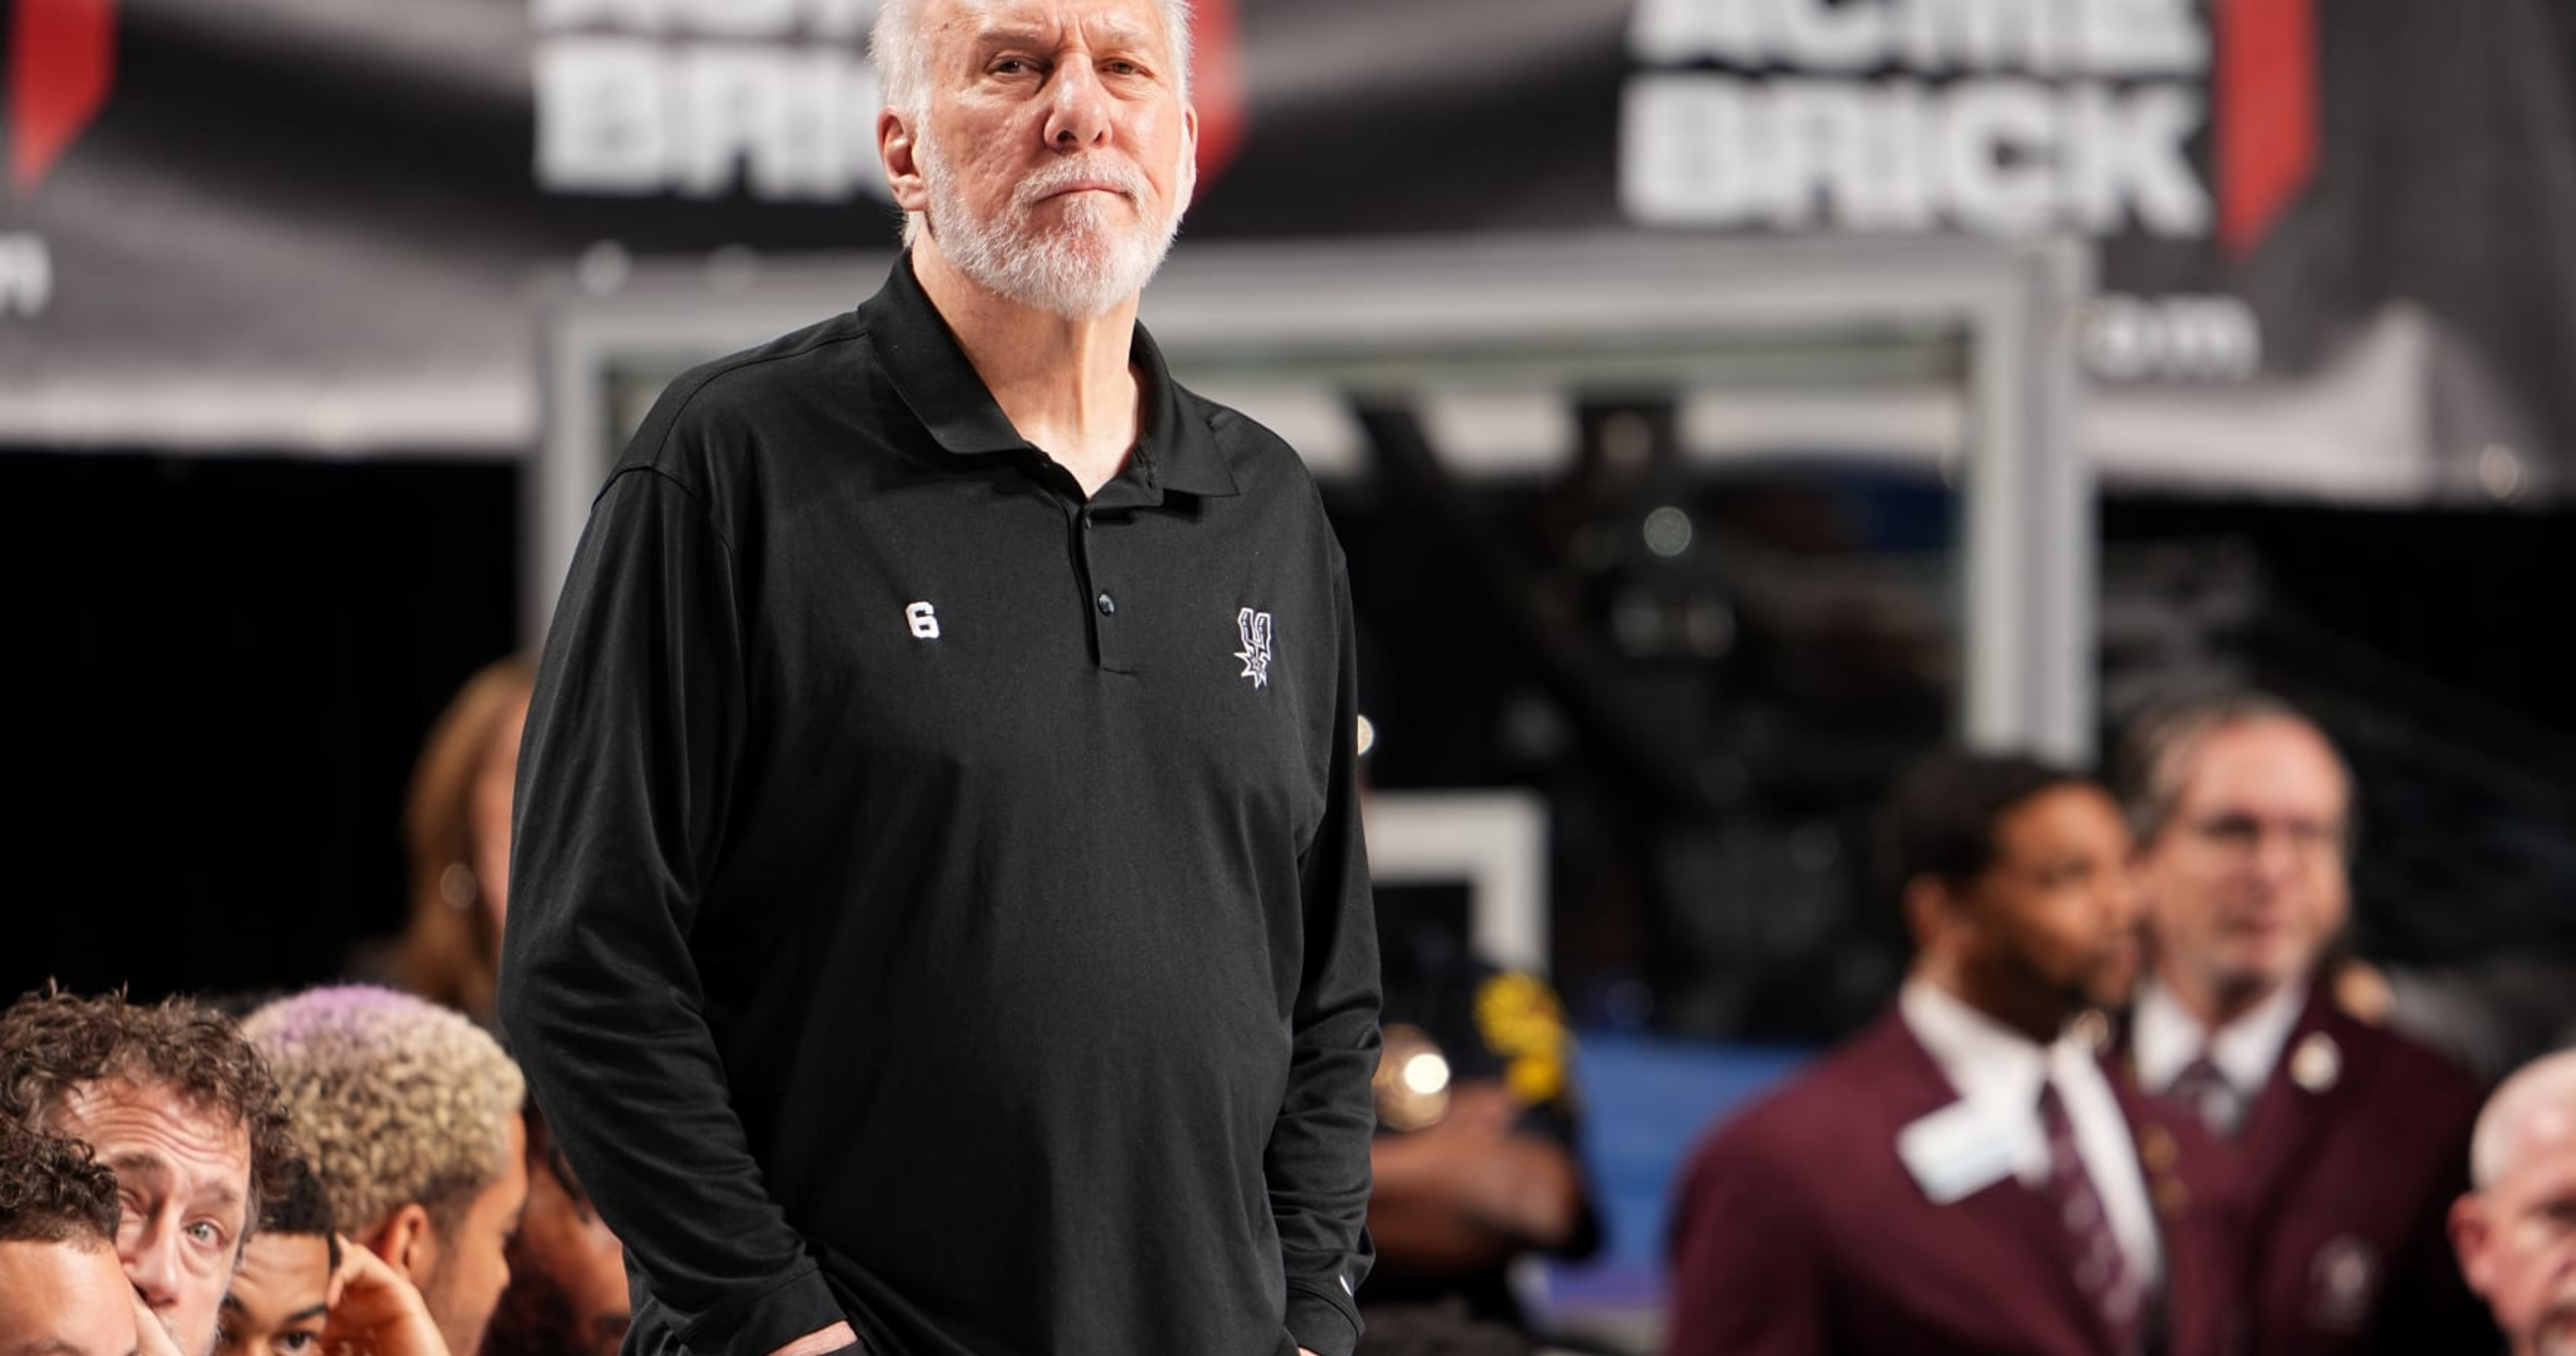 Gregg Popovich expected to return to Spurs in 2023-24, but doesn't have new  contract yet, per report 